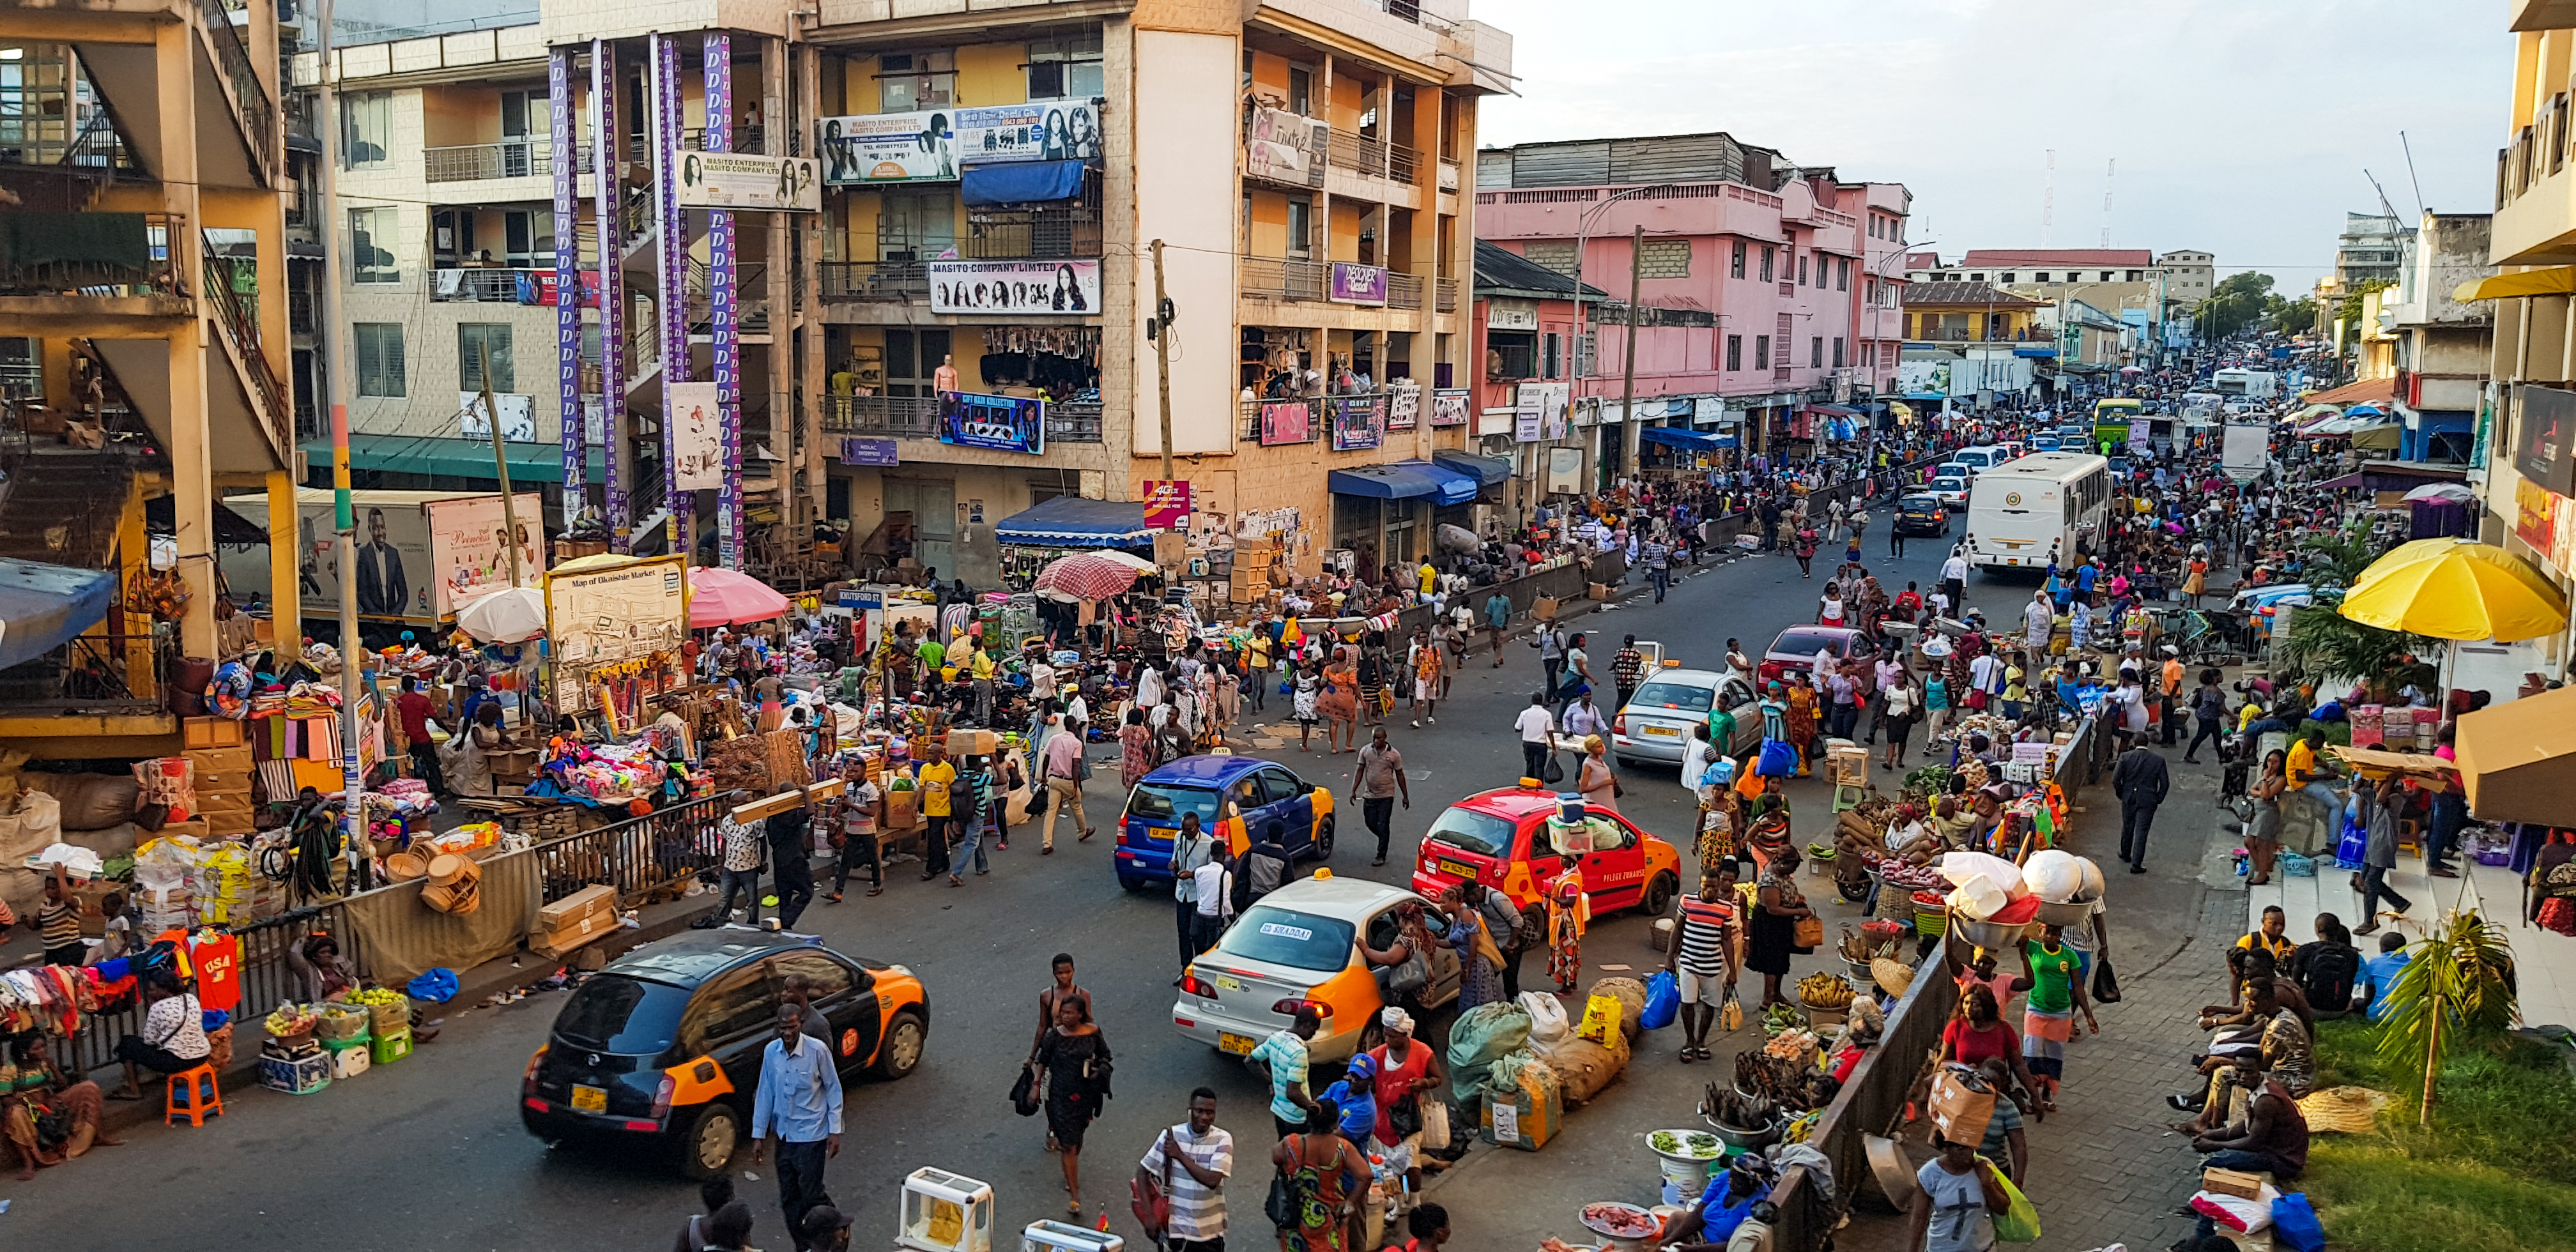 Within just a few months of landing in Accra, Ghana, Naaborko Sackeyfio-Lenoch felt confident traversing the city, conducting research, and interviewing local residents.